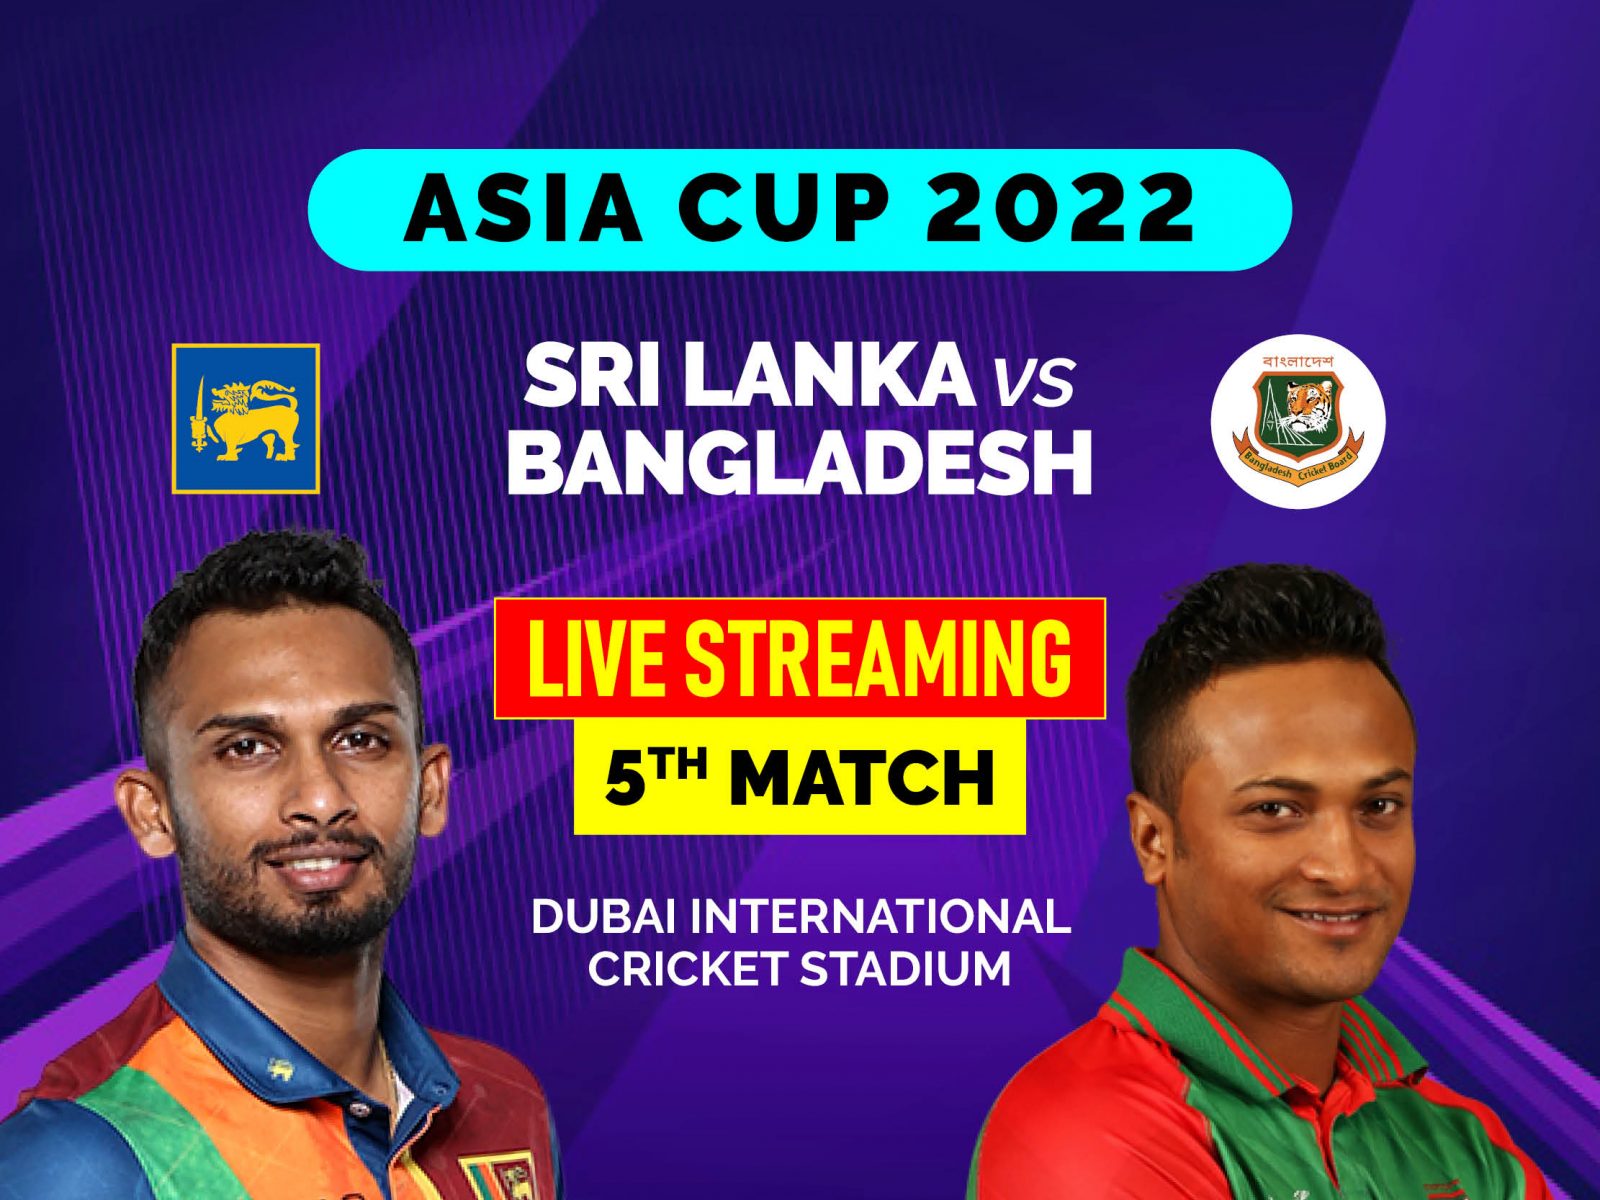 Sri Lanka vs Bangladesh Live Streaming Cricket When and Where to Watch Asia Cup 2022 Match